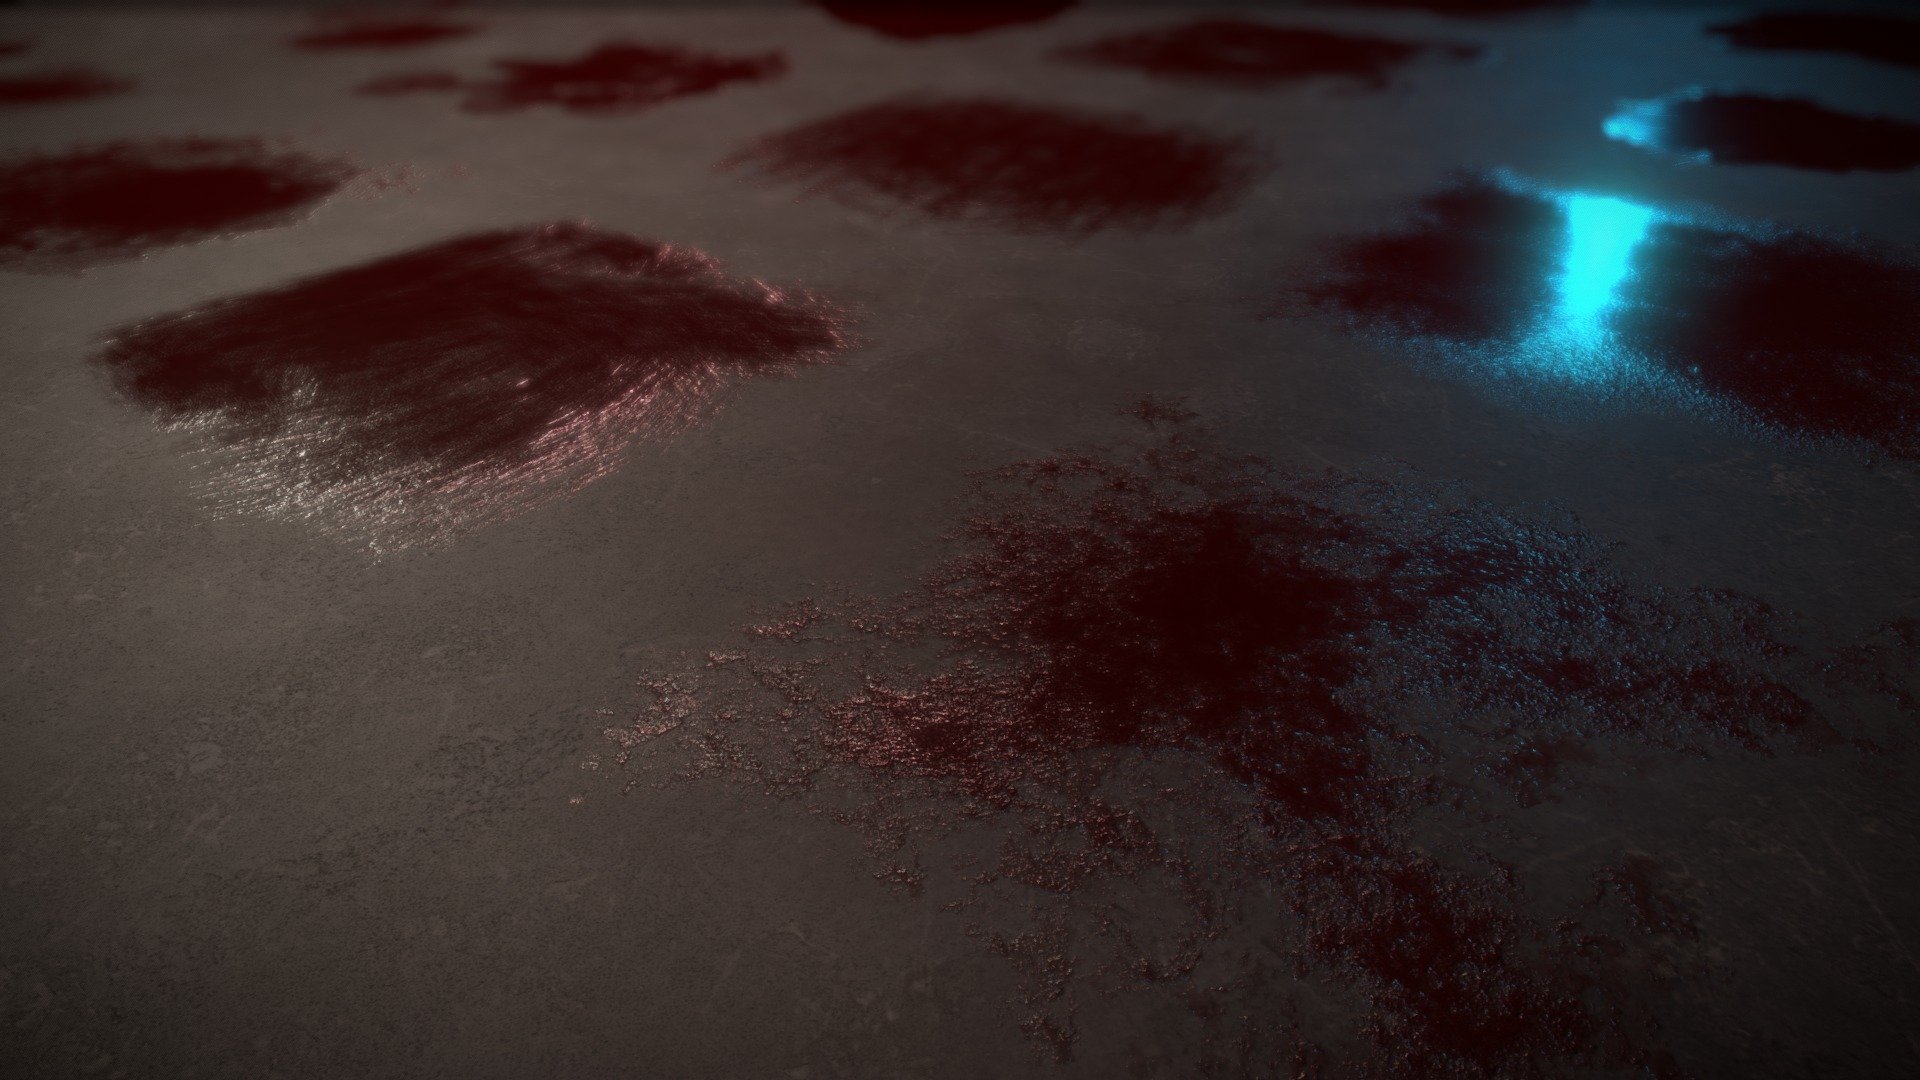 Couple of different types of blood pools that can be placed on a hard surface scene. Each pool is a plane that can be moved anywhere. Textures are currently optimised to look good in Unreal 5, so feel free to adjust any changes if necessary.
*** Download it here on ArtStation store** https://artstn.co/m/03gr5 - Pool of Blood Low Poly Planes - 3D model by Shaz (@shaz13) 3d model